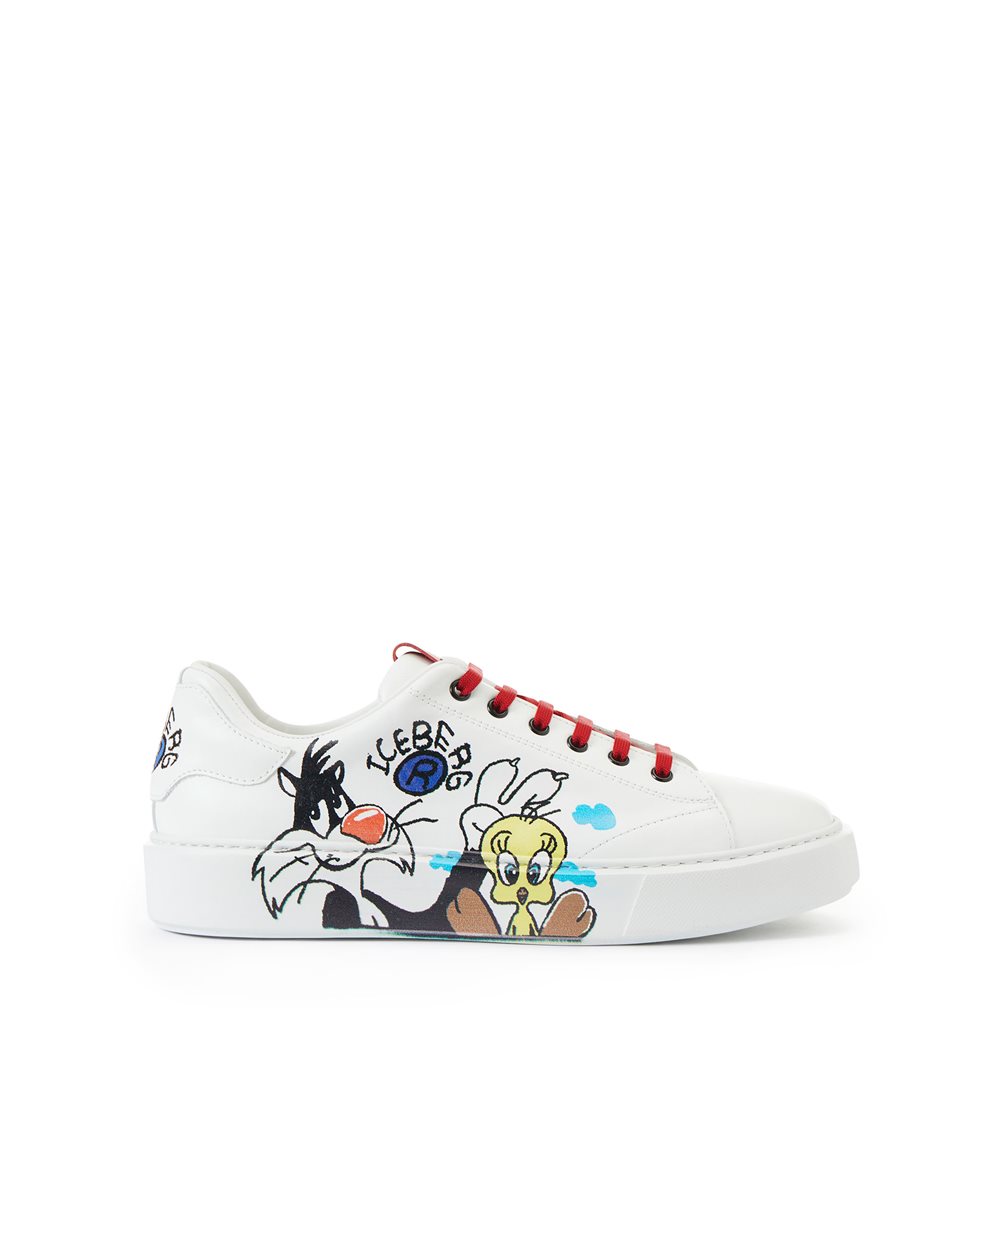 Carson sneakers with logo and cartoon graphics - Shoes & sneakers | Iceberg - Official Website